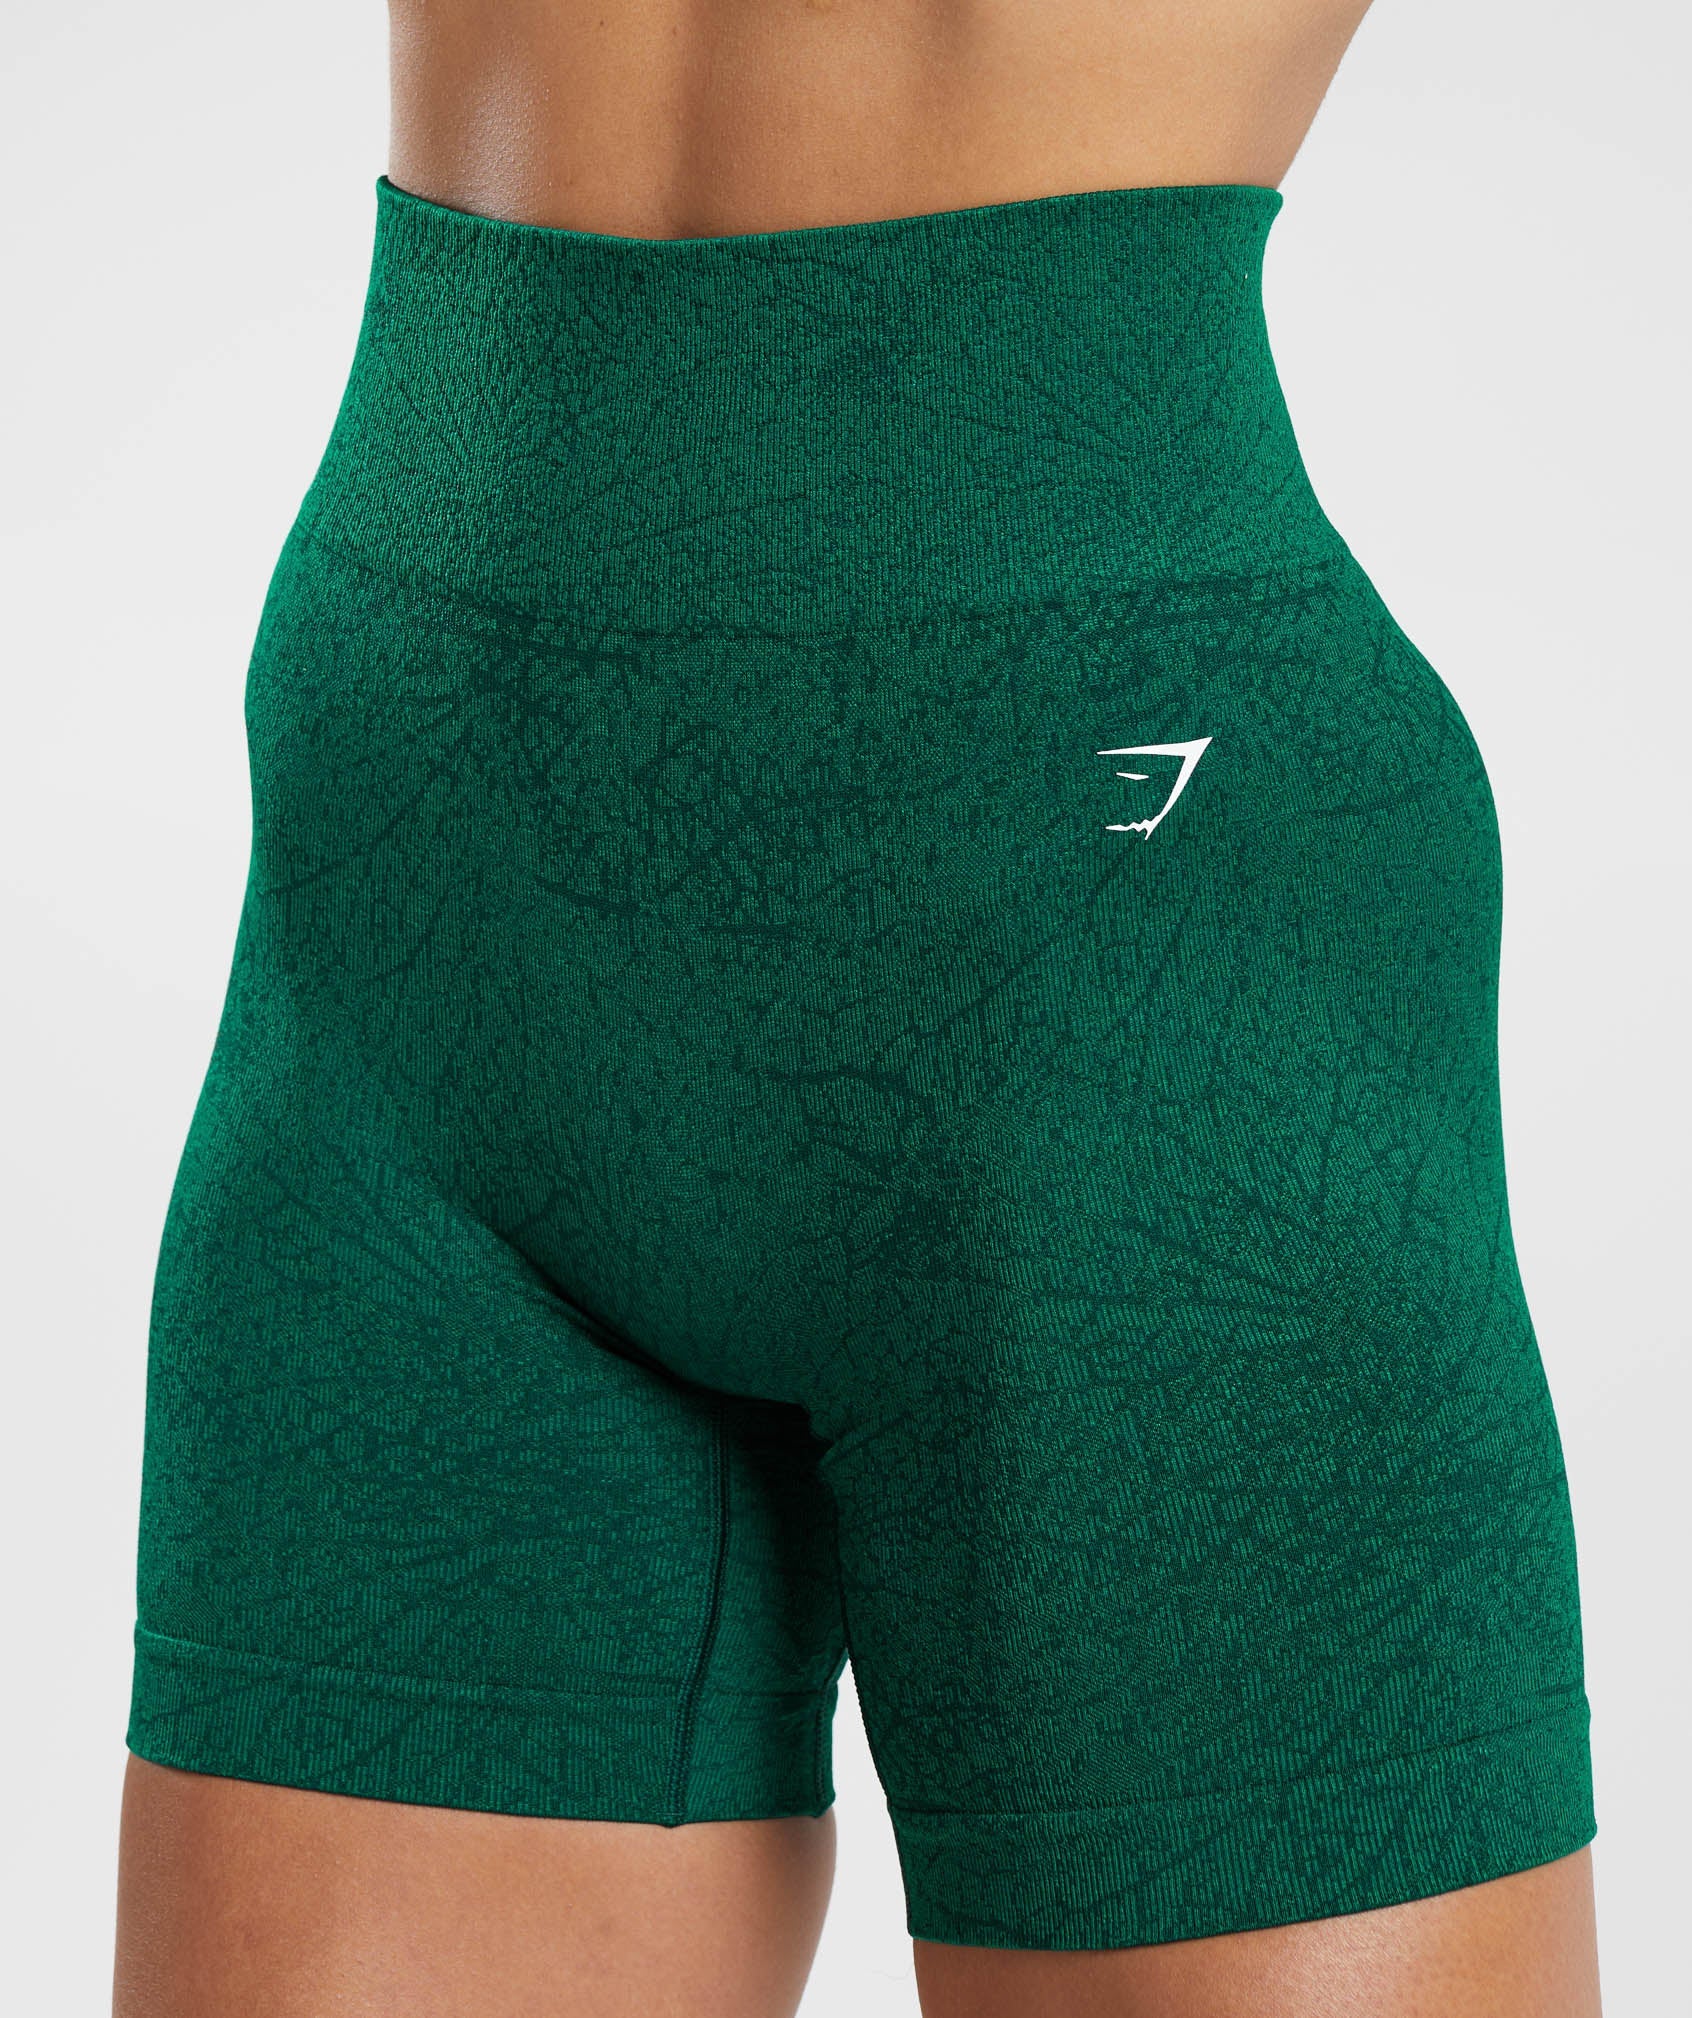 Adapt Pattern Seamless Shorts in Forest Green/Rich Green - view 5